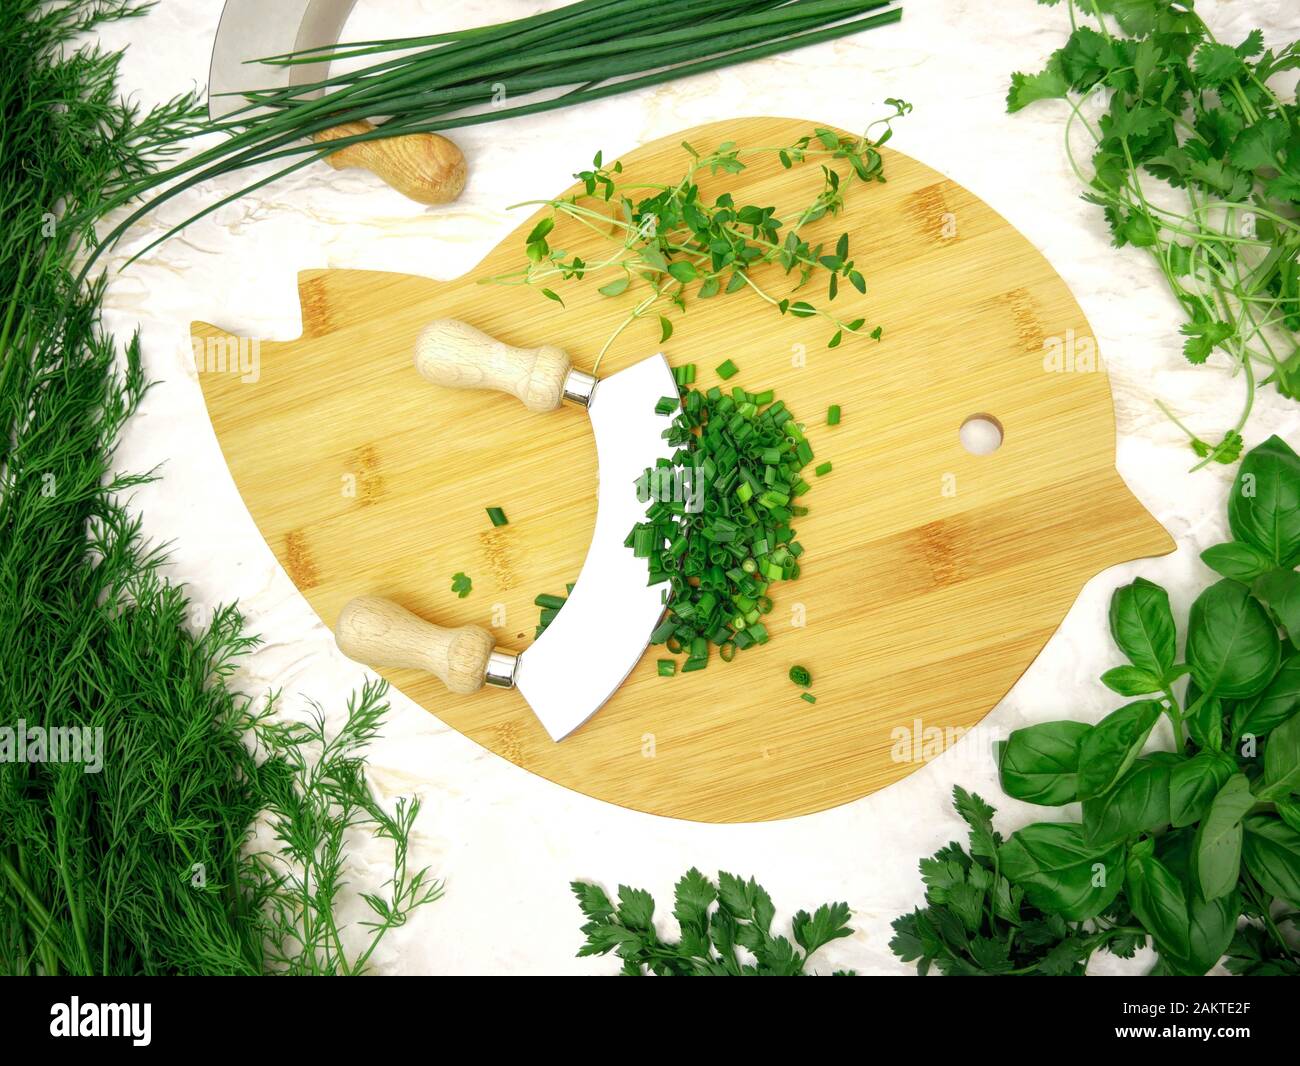 https://c8.alamy.com/comp/2AKTE2F/fresh-and-aromatic-herbs-chives-parsley-basil-thyme-coriander-fennel-2AKTE2F.jpg